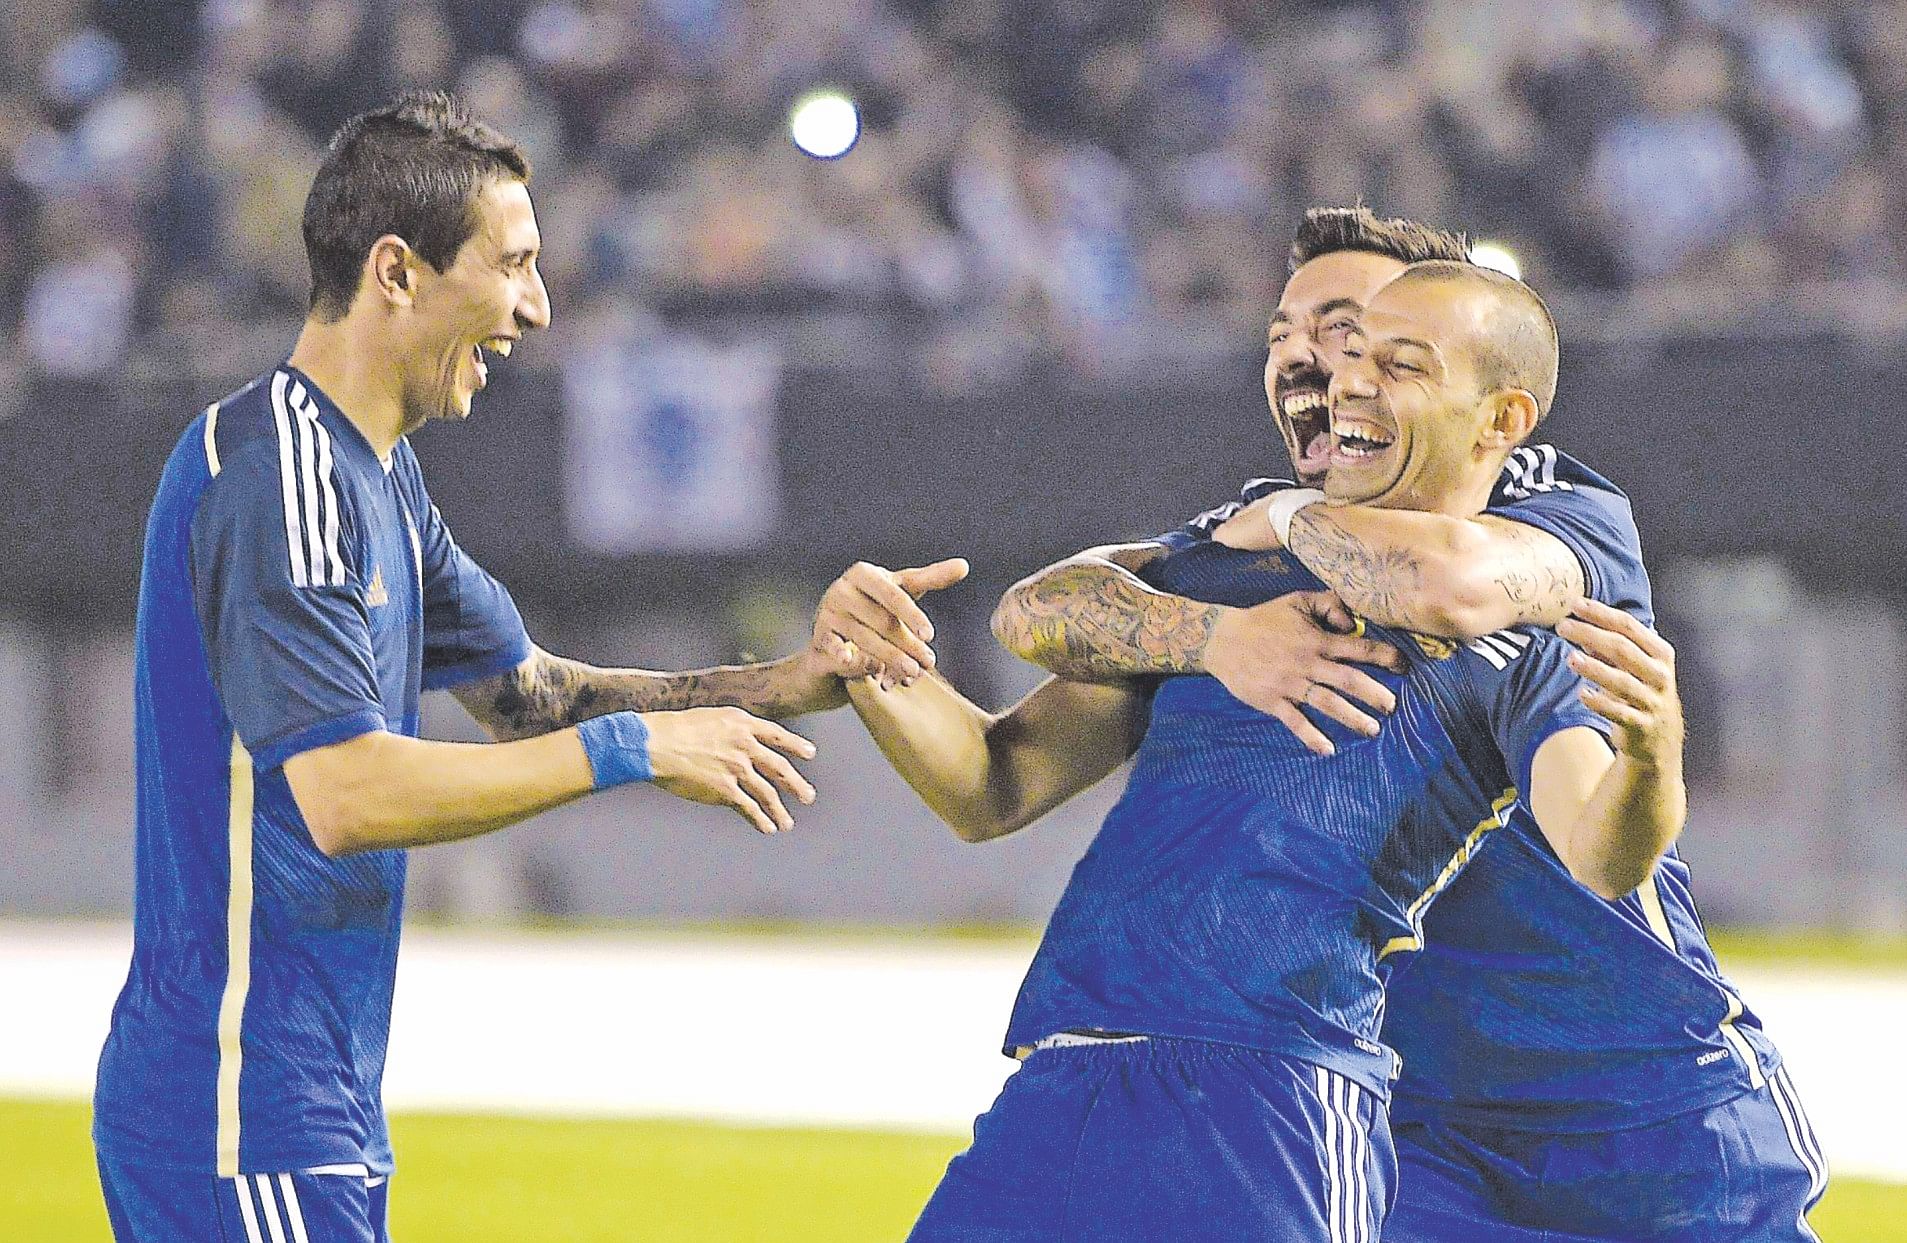  Argentina midfielder Javier Mascherano (C) celebrates his goal with teammates Ezequiel Lavezzi and Angel Di Maria (L) during their international friendly  against Trinidad and Tobago at the Monumental Stadium in Buenos Aires on Wednesday. PHOTO:  AFP